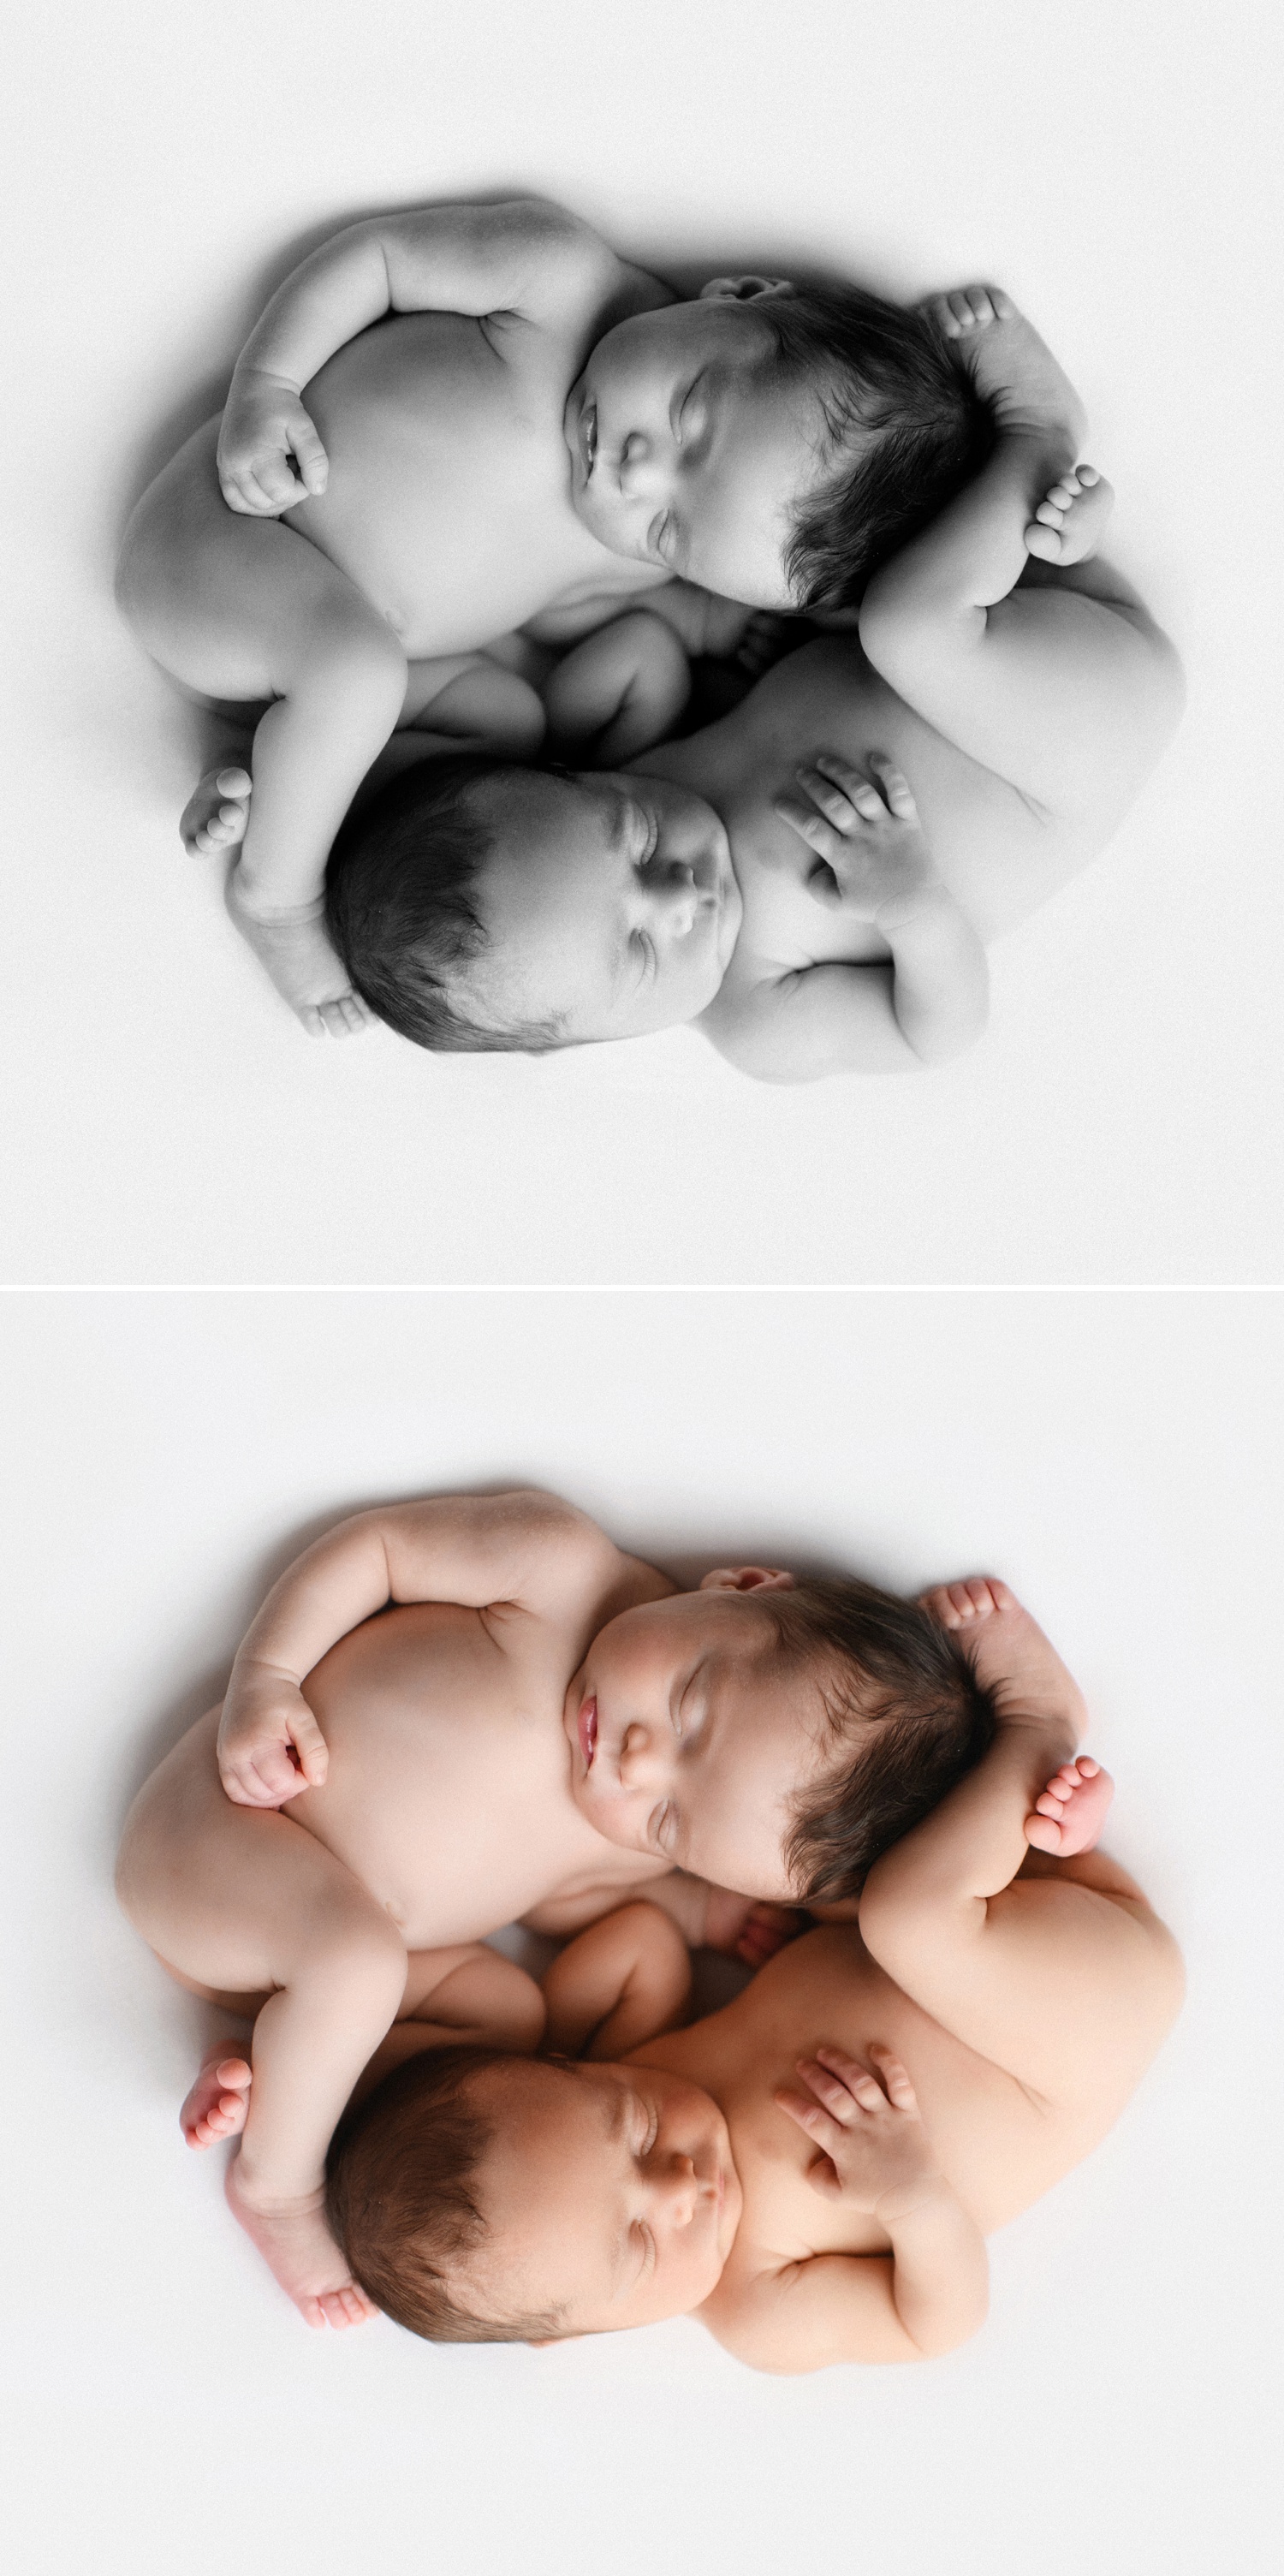 Newborn twins photographed at 3 weeks old at Arcadian Photography's studio in Salem, Oregon.